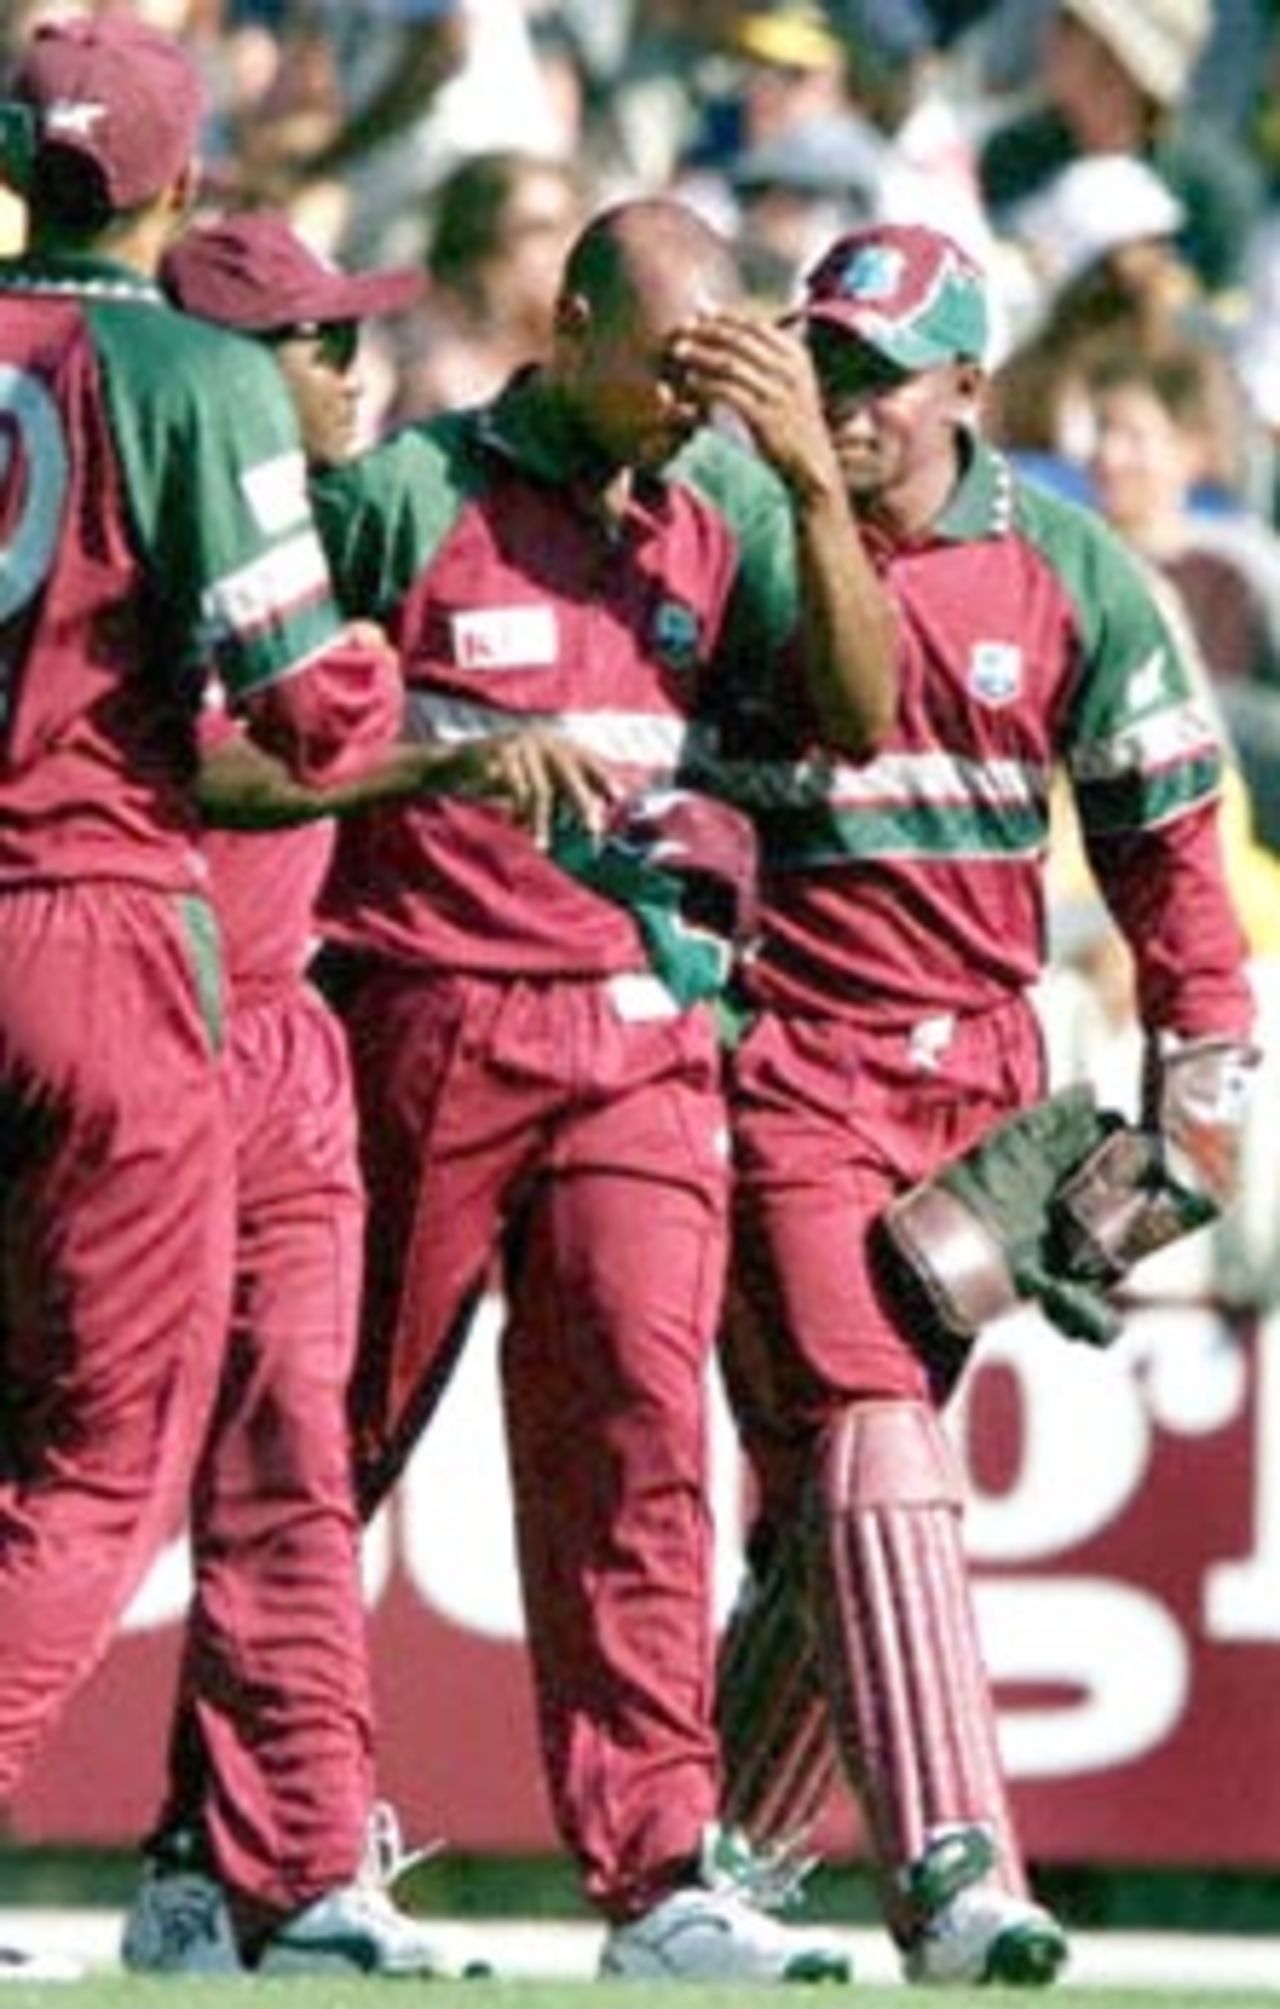 West Indian fieldsman Laurie Williams (2/R) is comforted by wicketkeeper Ridley Jacobs (R), Brian Lara (2/L) and captain Jimmy Adams (L) after hurting himself trying to take a catch looks on in their one day clash against Australia at the MCG in Melbourne 11 January 2000. Australia scored 267-6 off their 50 overs with the West Indies about to start their innings.